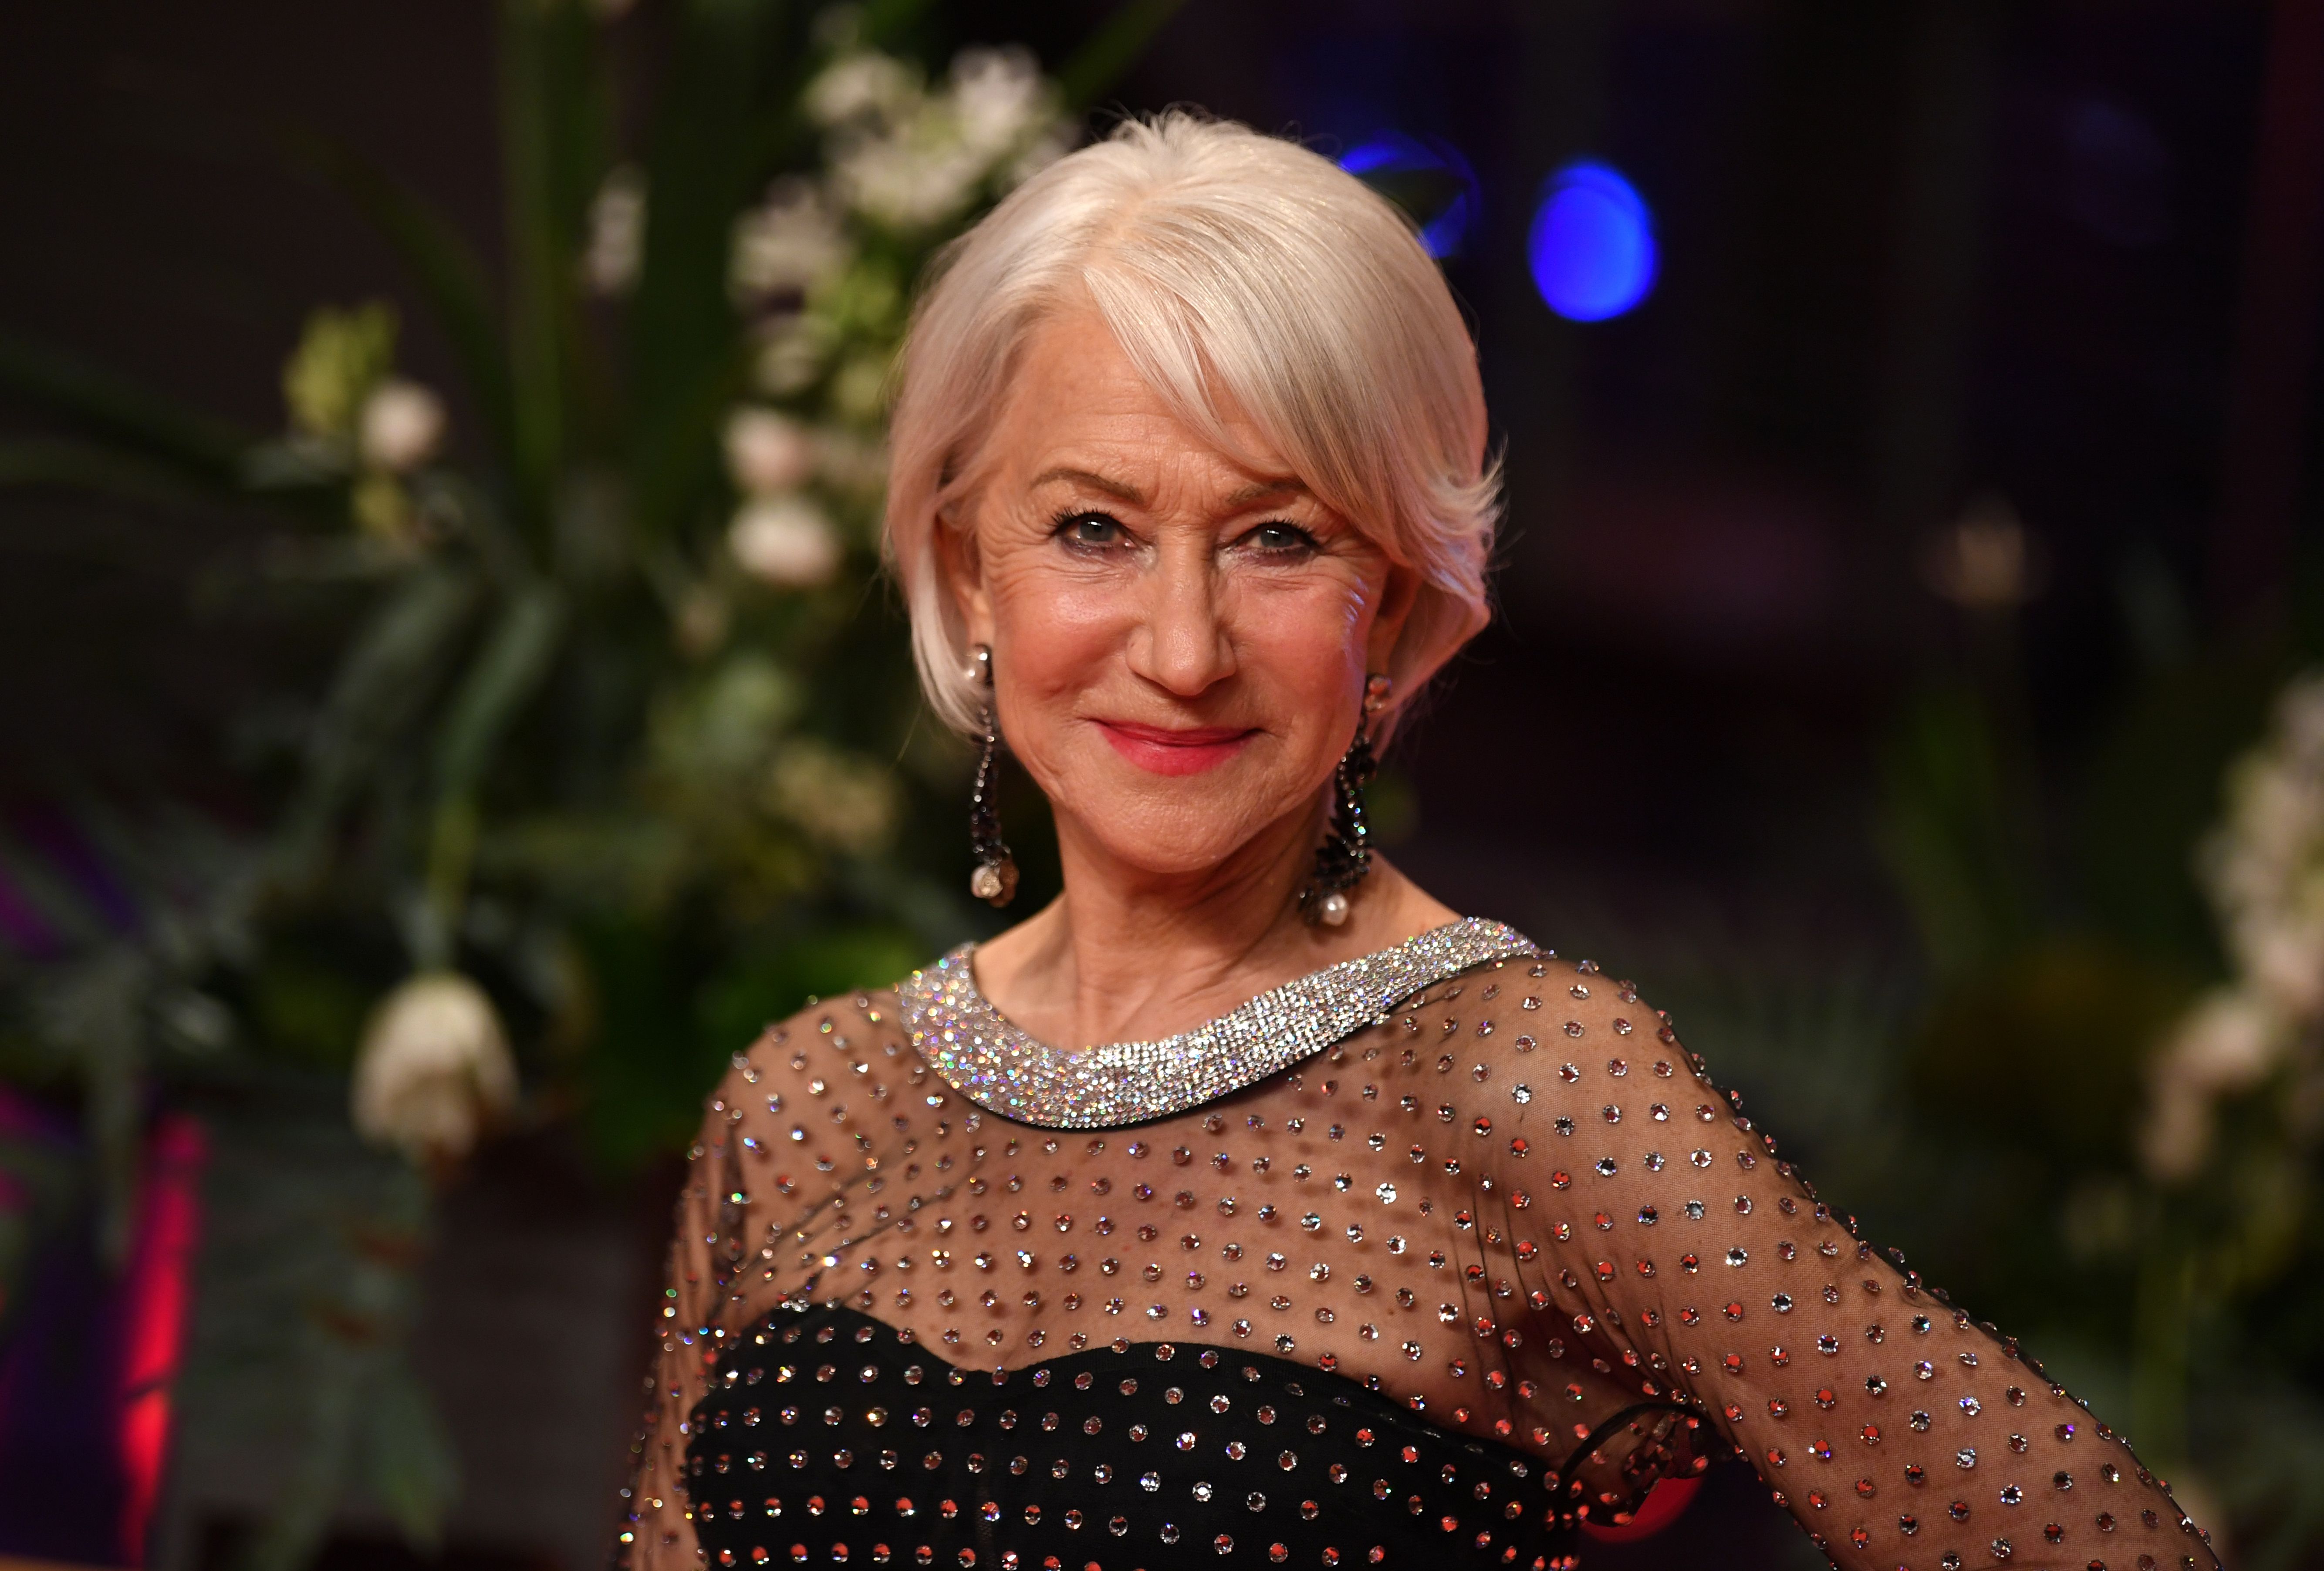 Helen Mirren at the 70th Berlinale International Film Festival on February 27, 2020, in Germany. | Photo: Getty Images